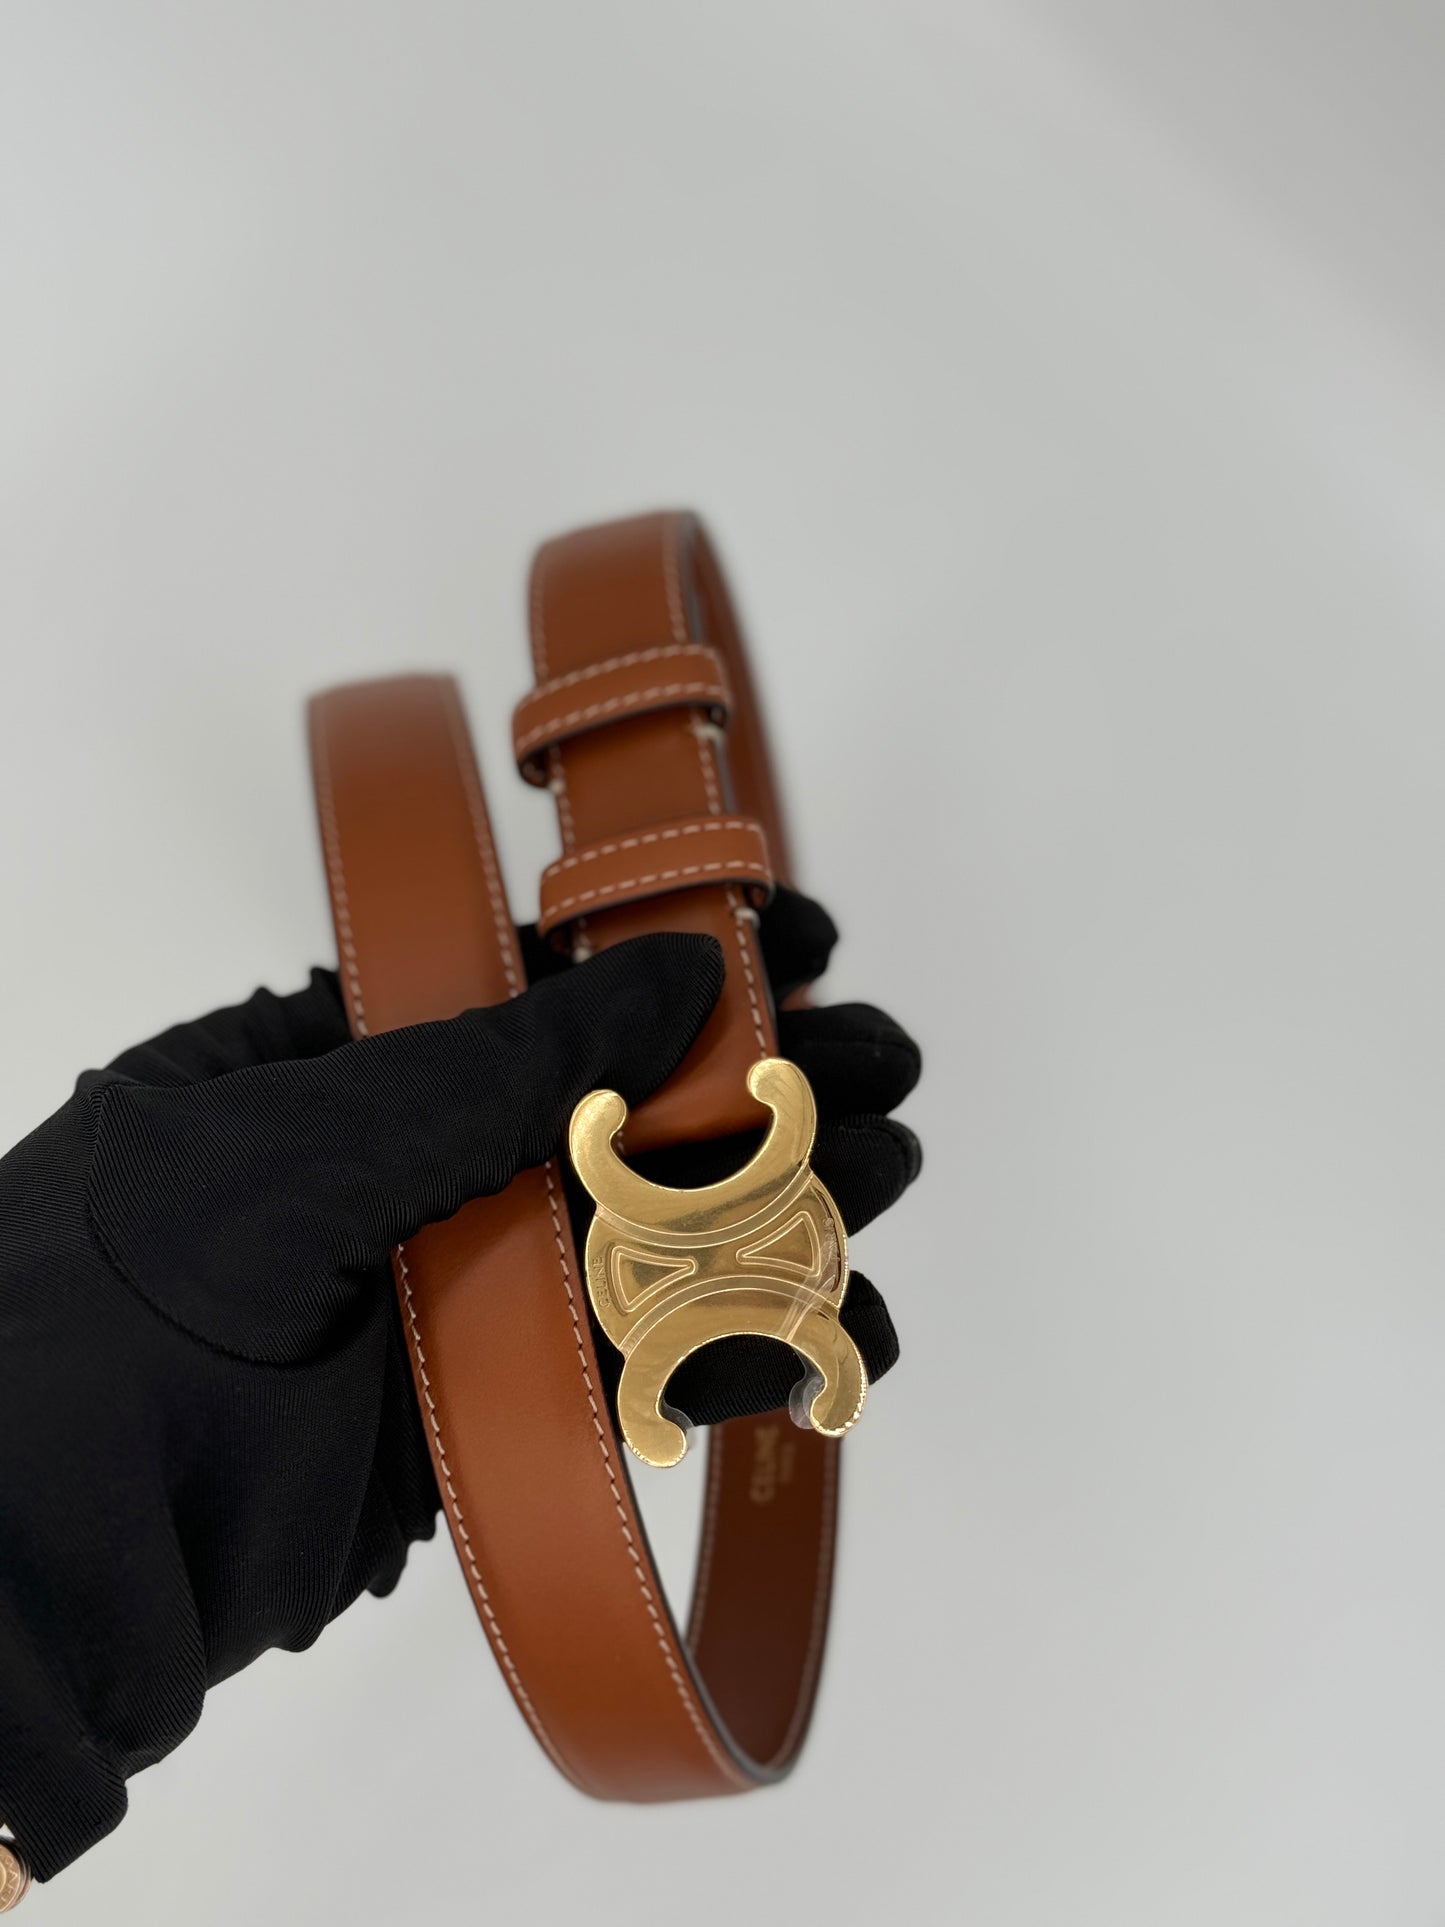 CELINE SMALL TRIOMPHE BELT IN LEATHER BROWN 75